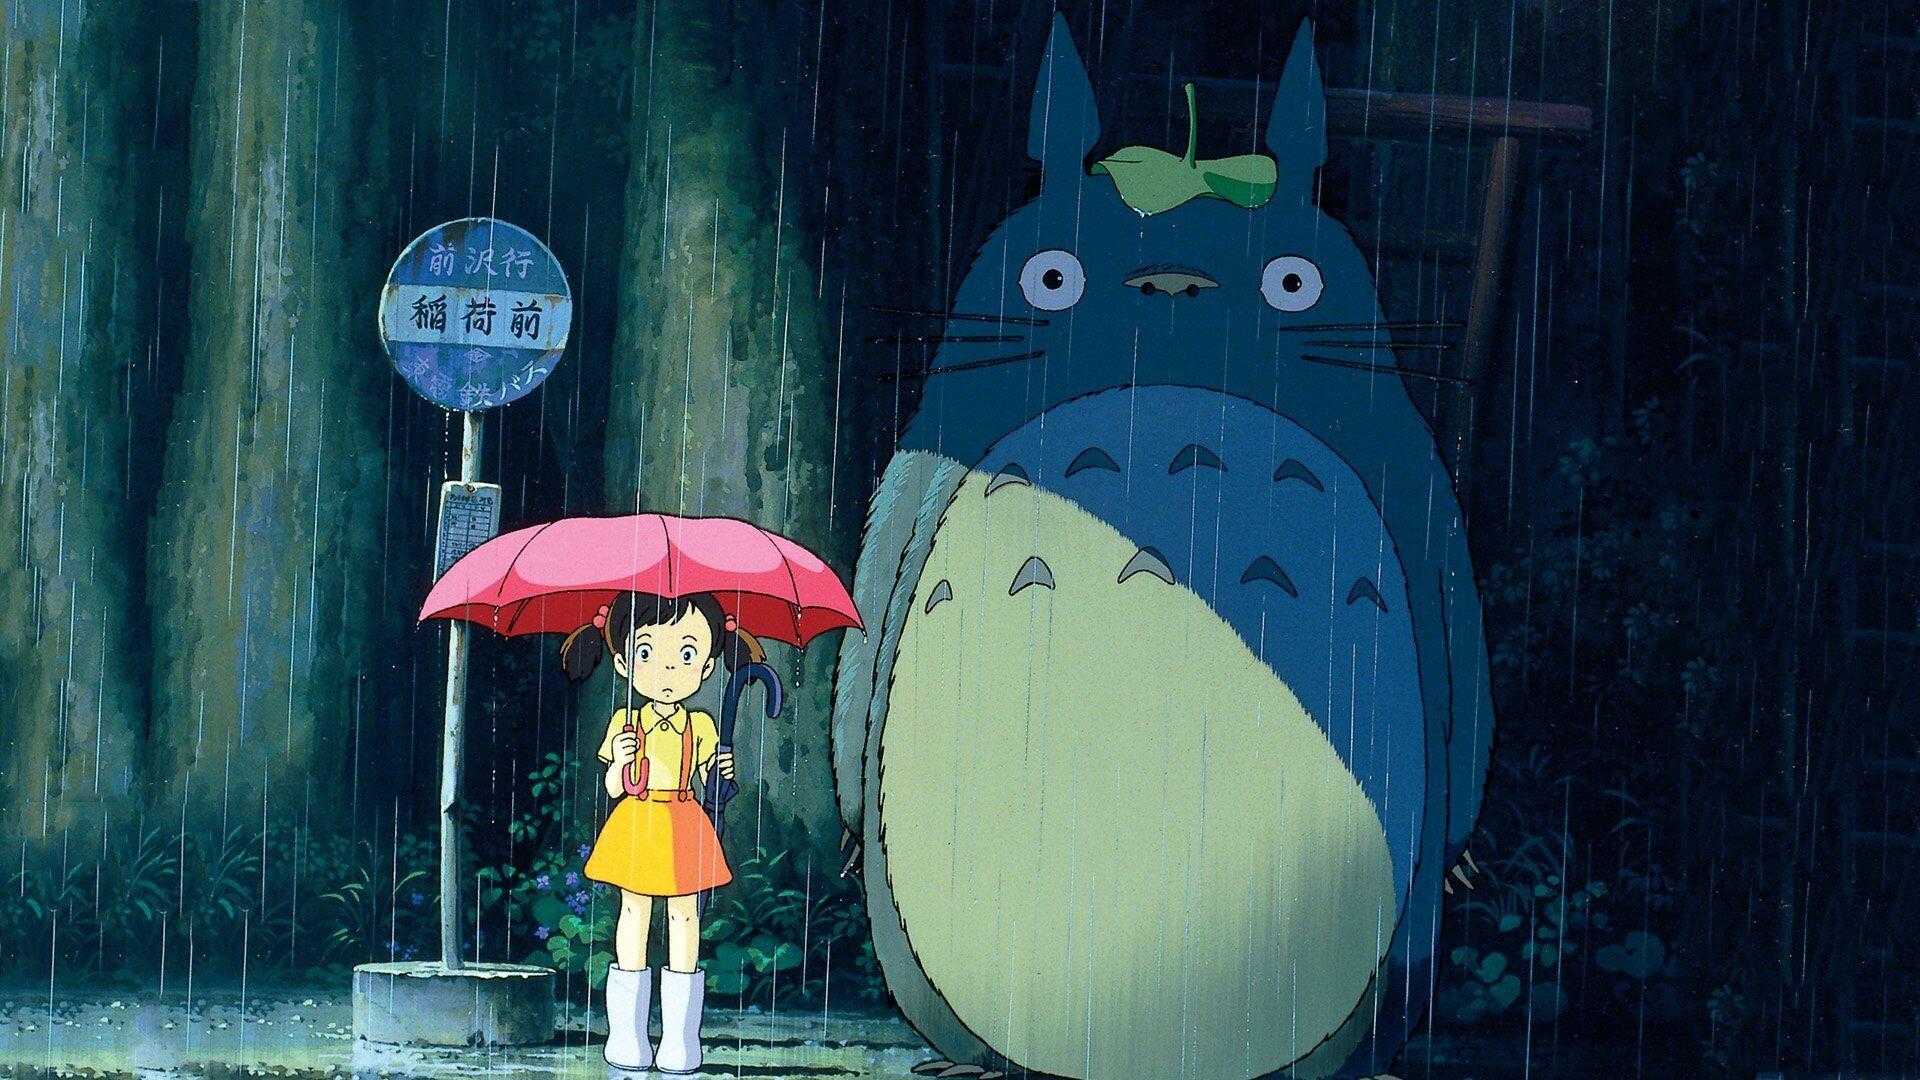 My Neighbor Totoro: A story about two sisters, taking place in the 1950s Japan, Satsuki. 1920x1080 Full HD Wallpaper.